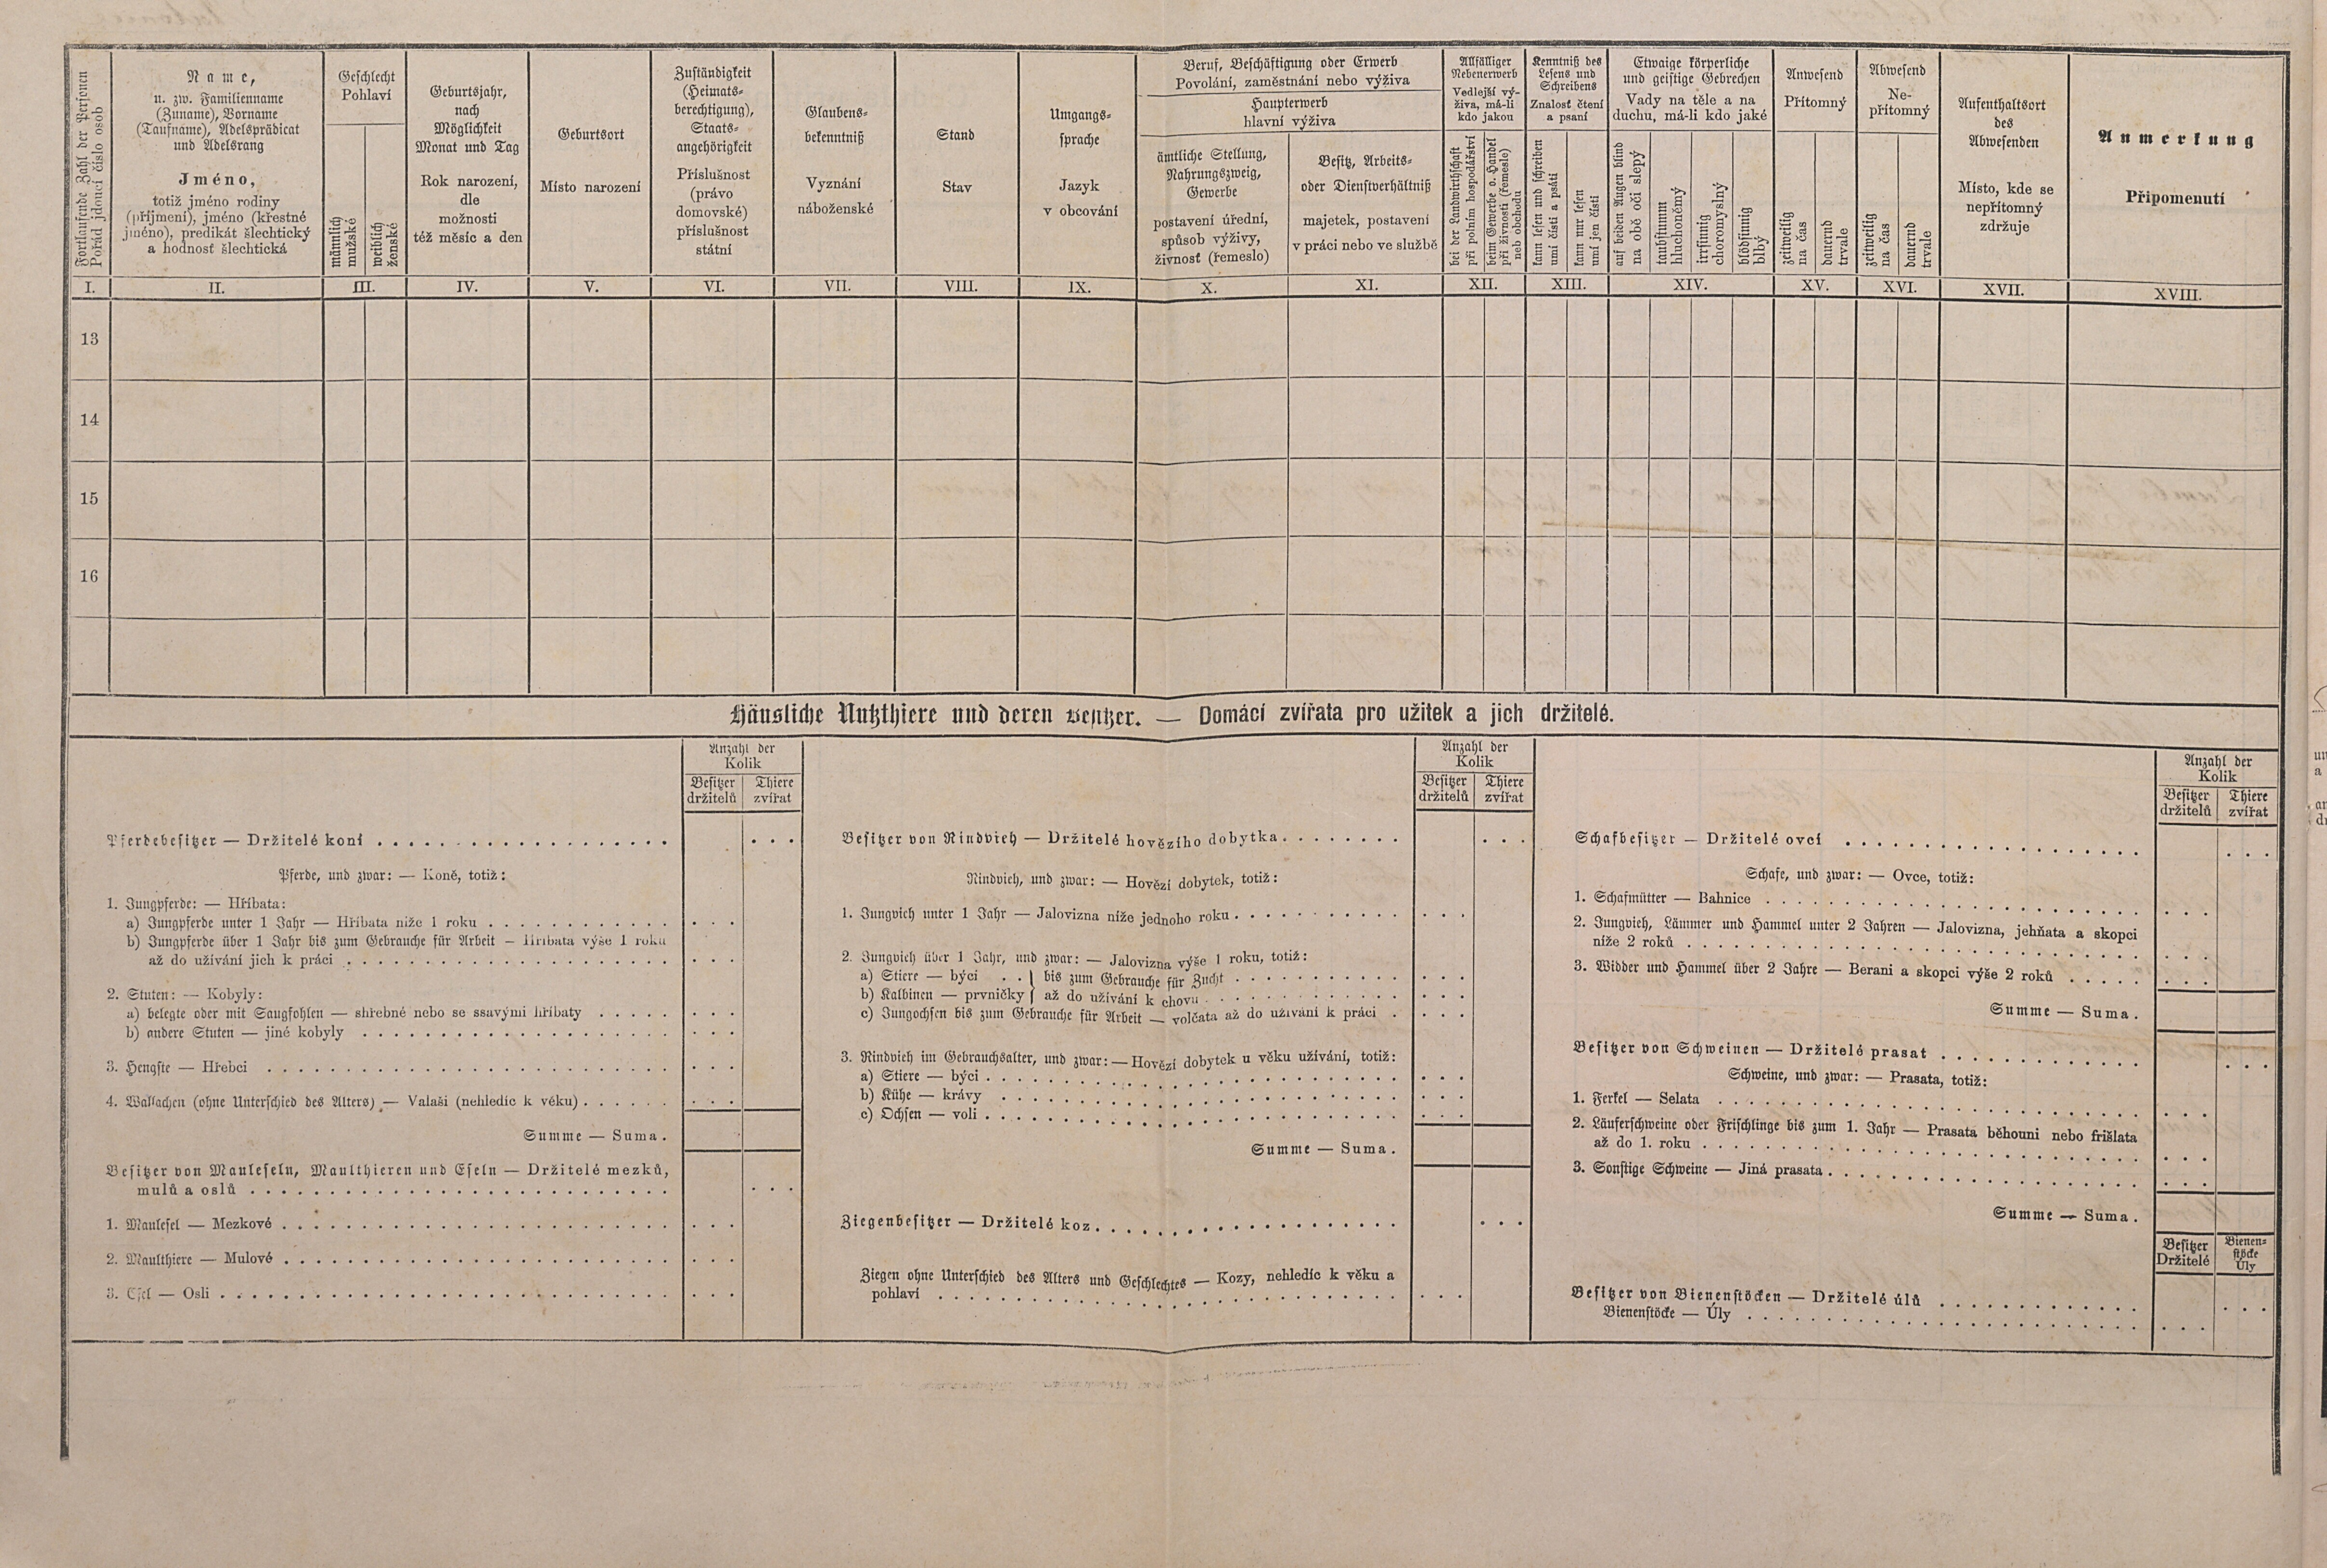 9. soap-kt_01159_census-1880-malonice-cp001_0090